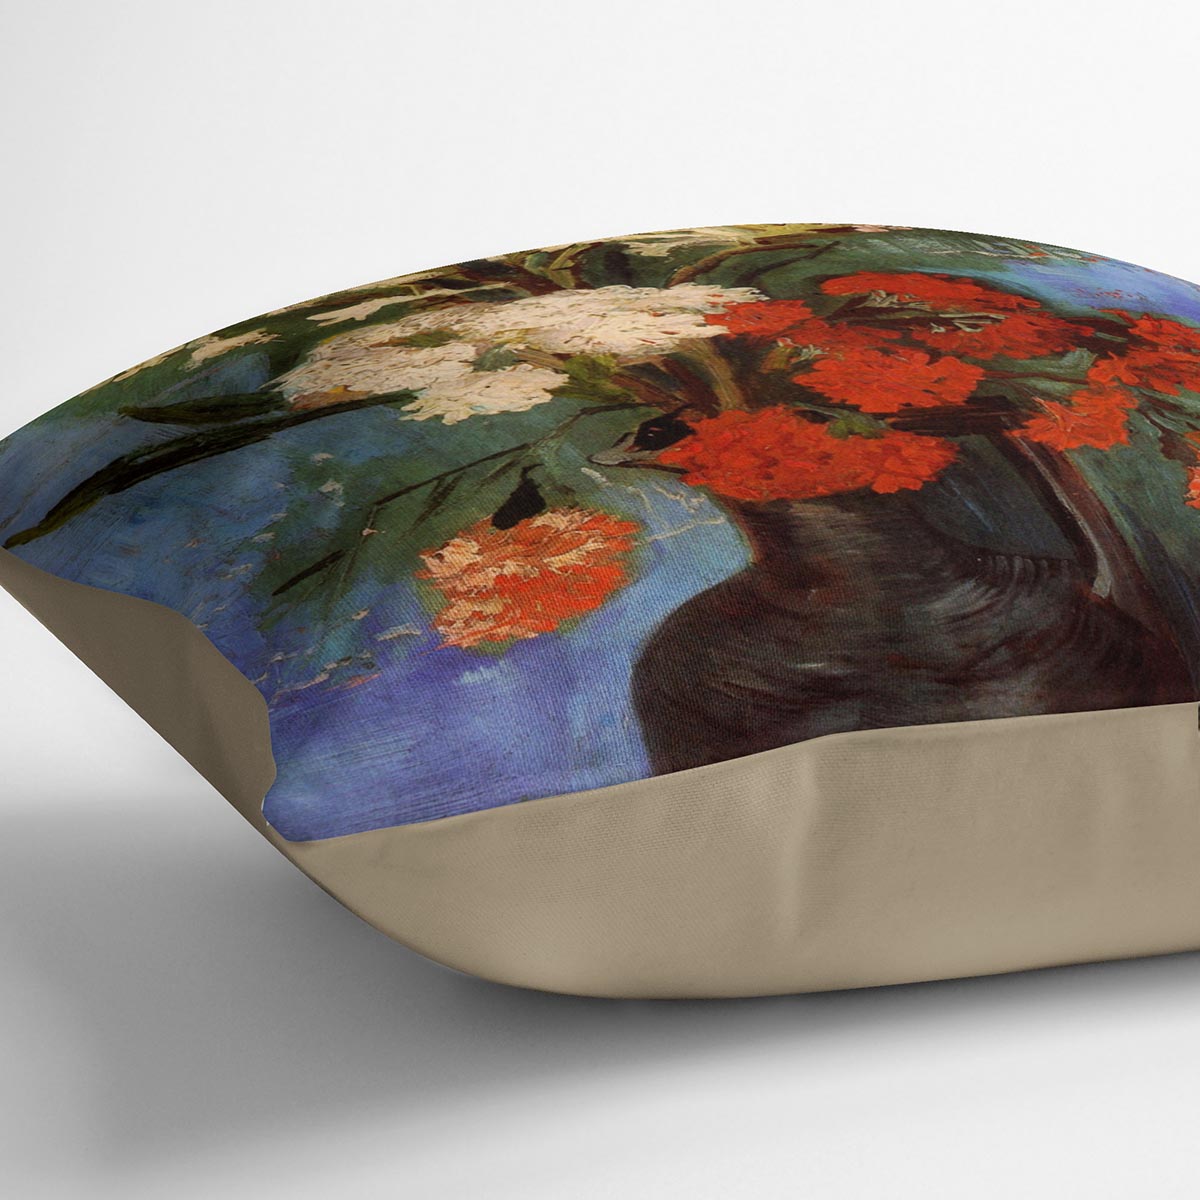 Vase with Carnations and Other Flowers by Van Gogh Cushion